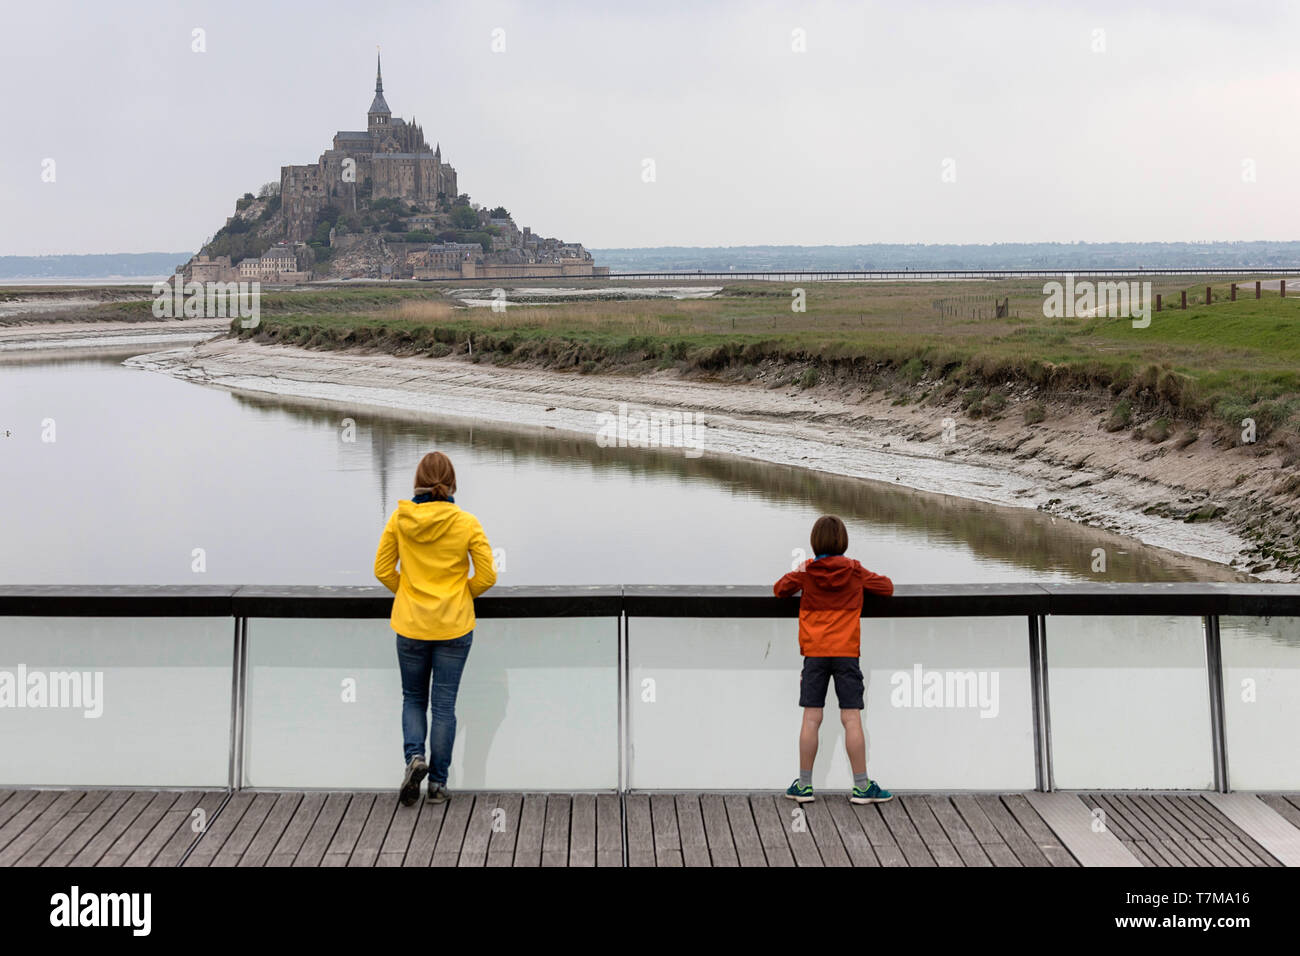 Mother and son standing on the wooden footbridge over the dam on Couesnon river, looking at the tidal island Mont saint Michel, Normandy, France Stock Photo